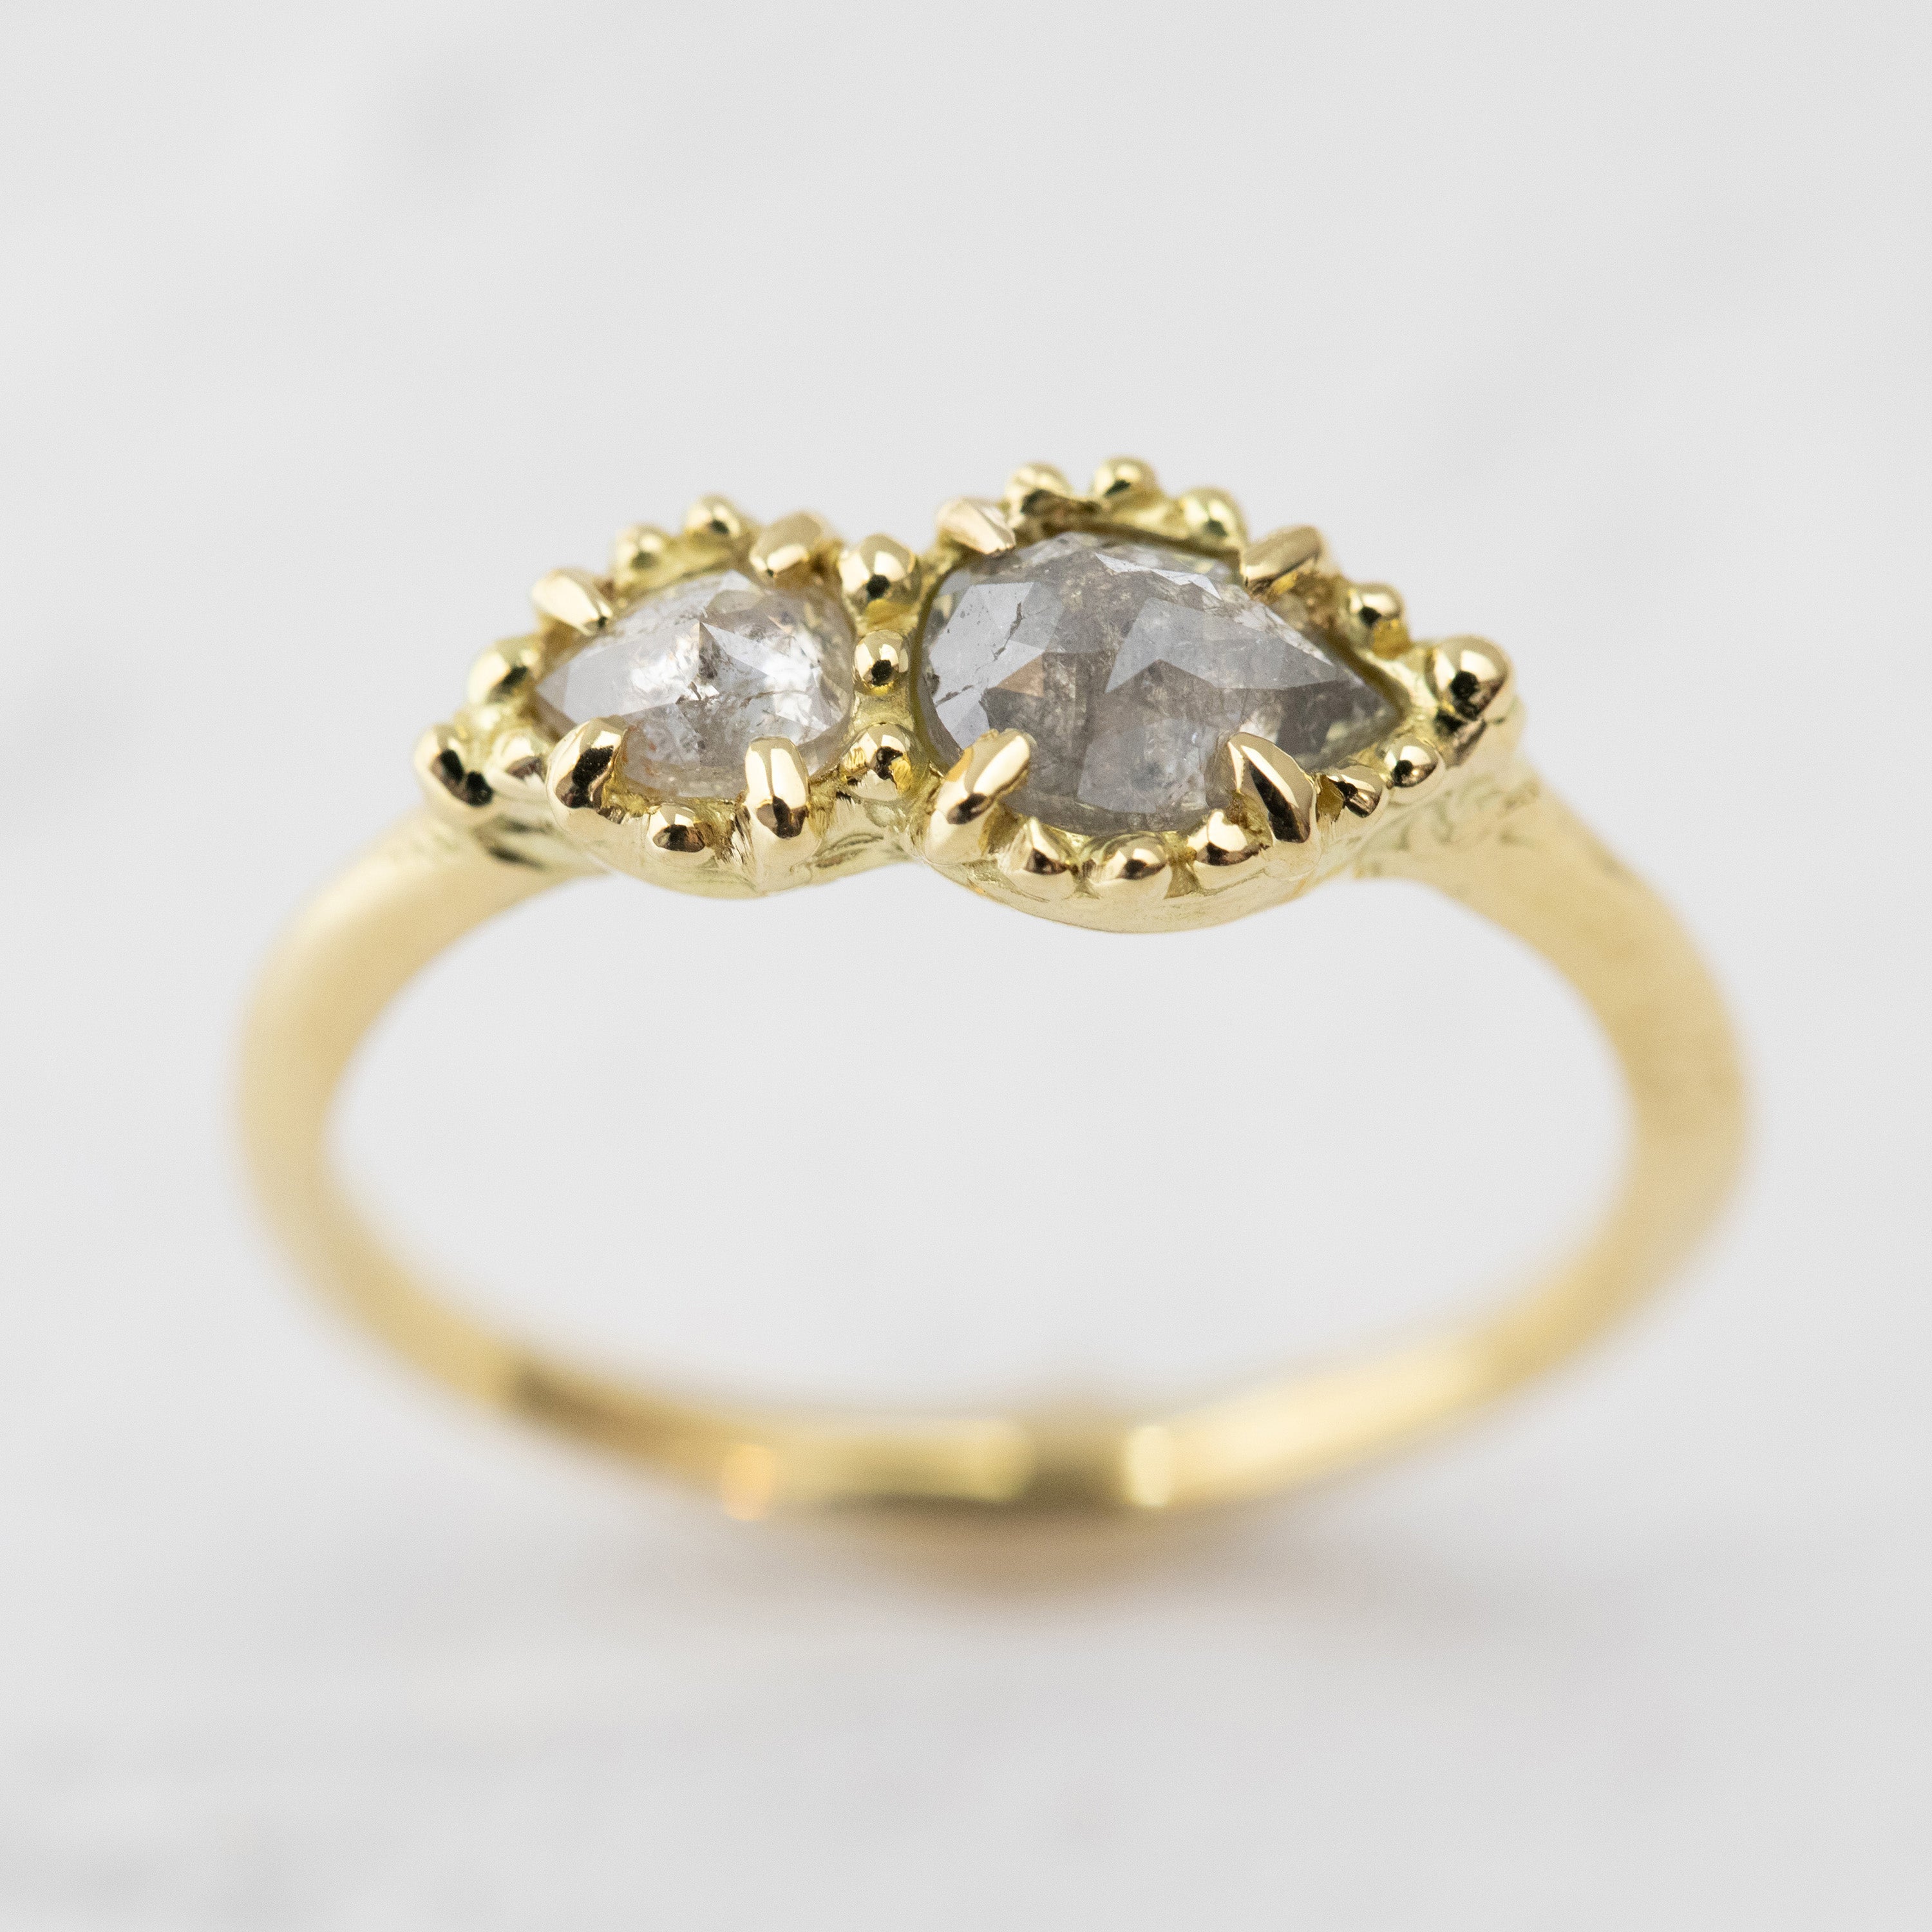 Gray and White Pear Shaped Rustic Diamond Ring (18k)